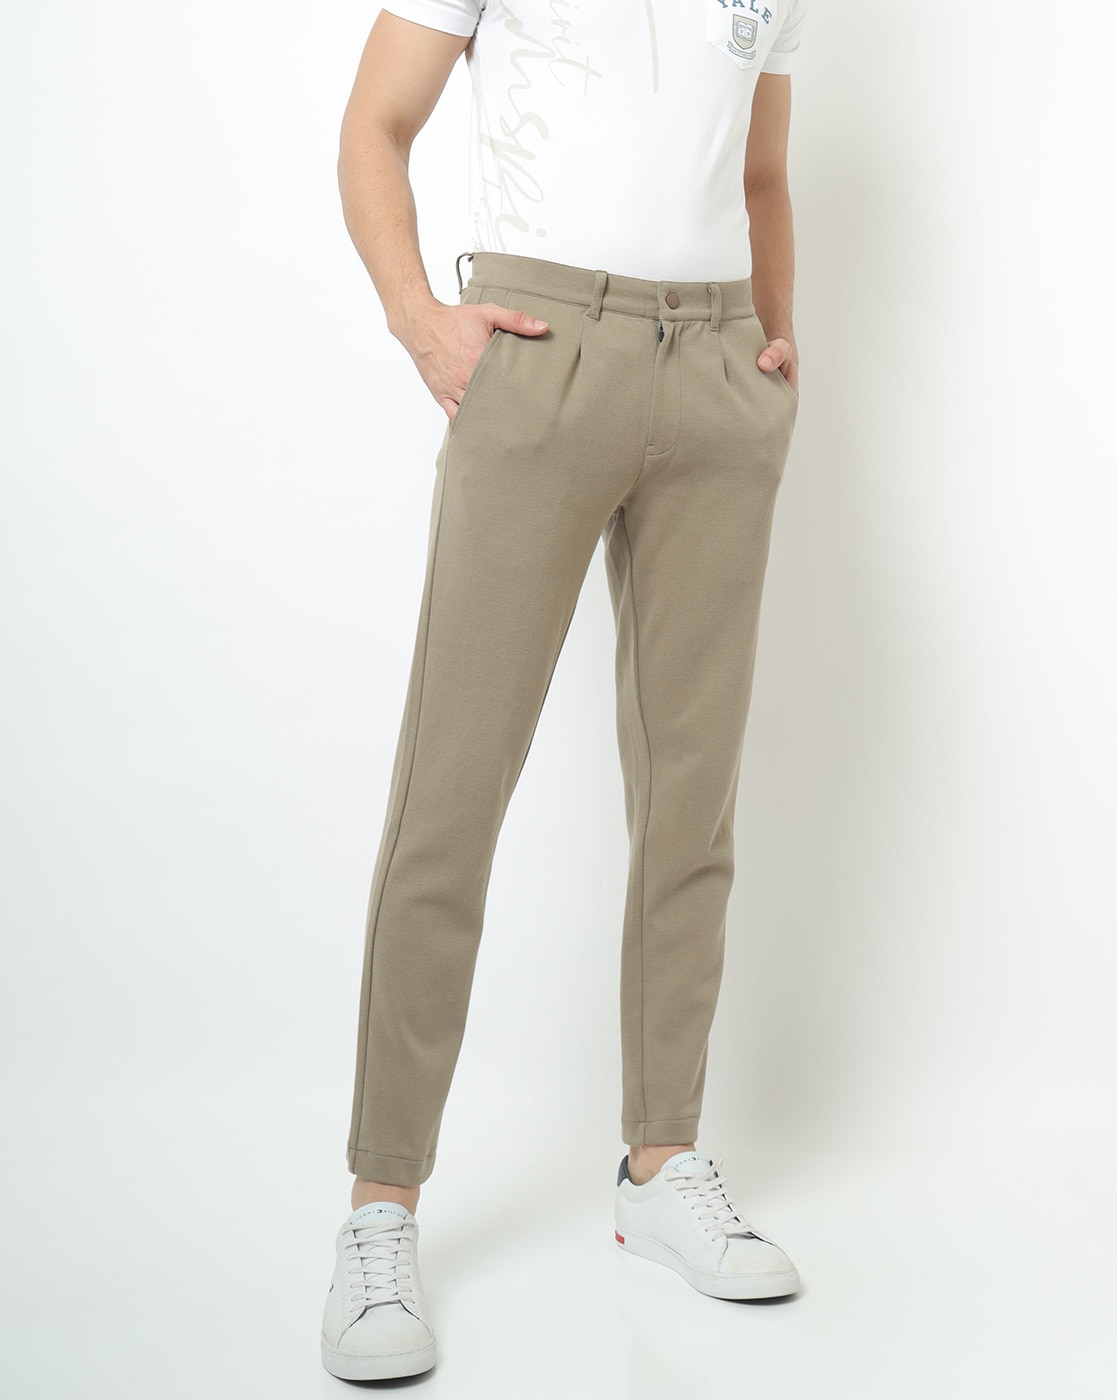 Buy Khaki Sport Fit Athleisure Joggers Online at Muftijeans